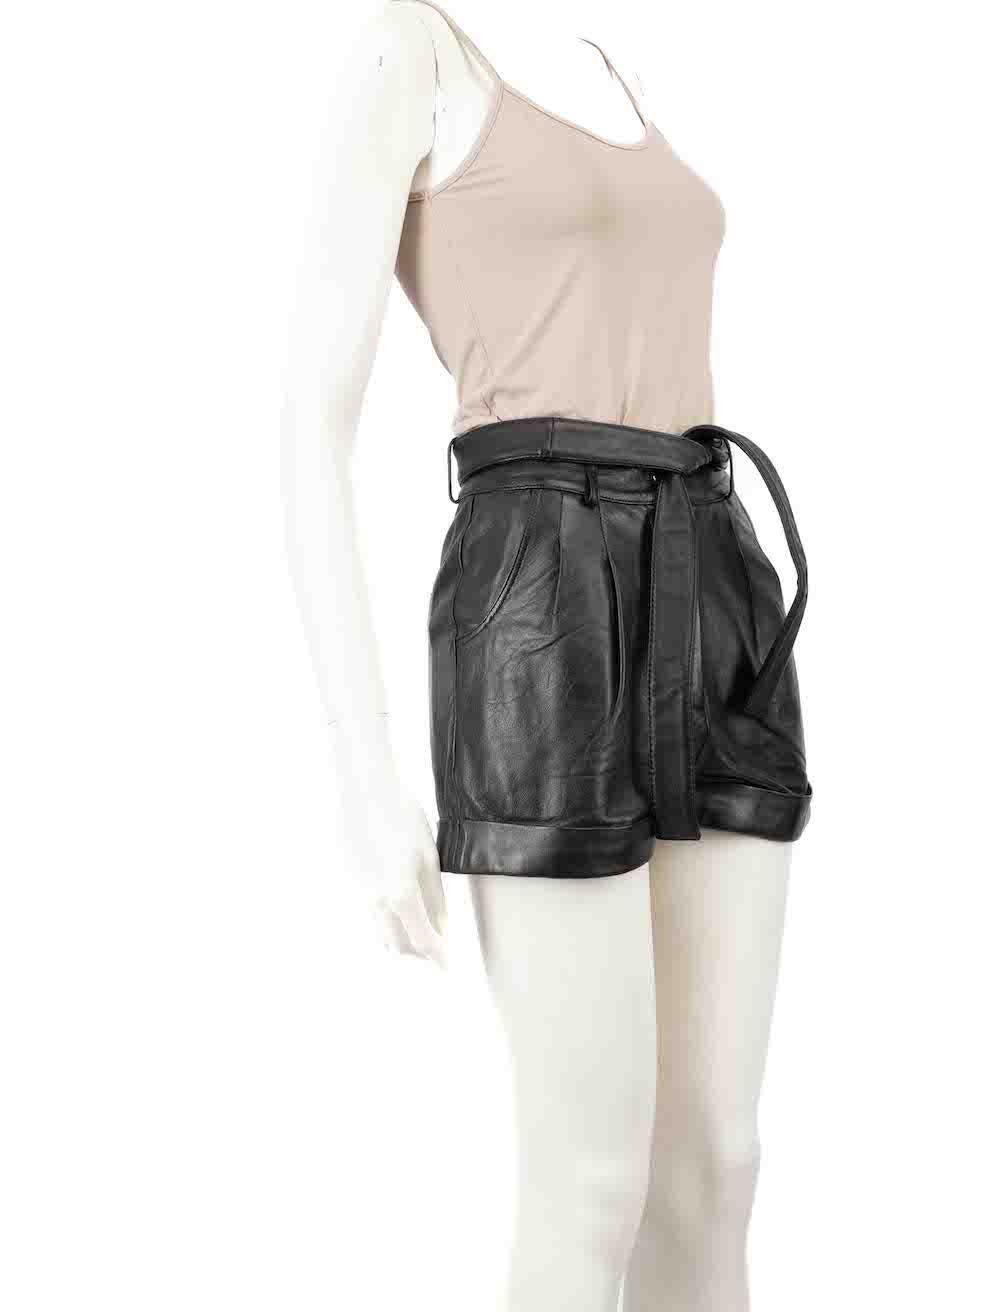 CONDITION is Good. Minor wear to shorts is evident. Light discolouration to the crotch area. General creasing to the leather fabric especially on the front right, back waistband and on the back left bottom area. Small abrasions to the waist belt on